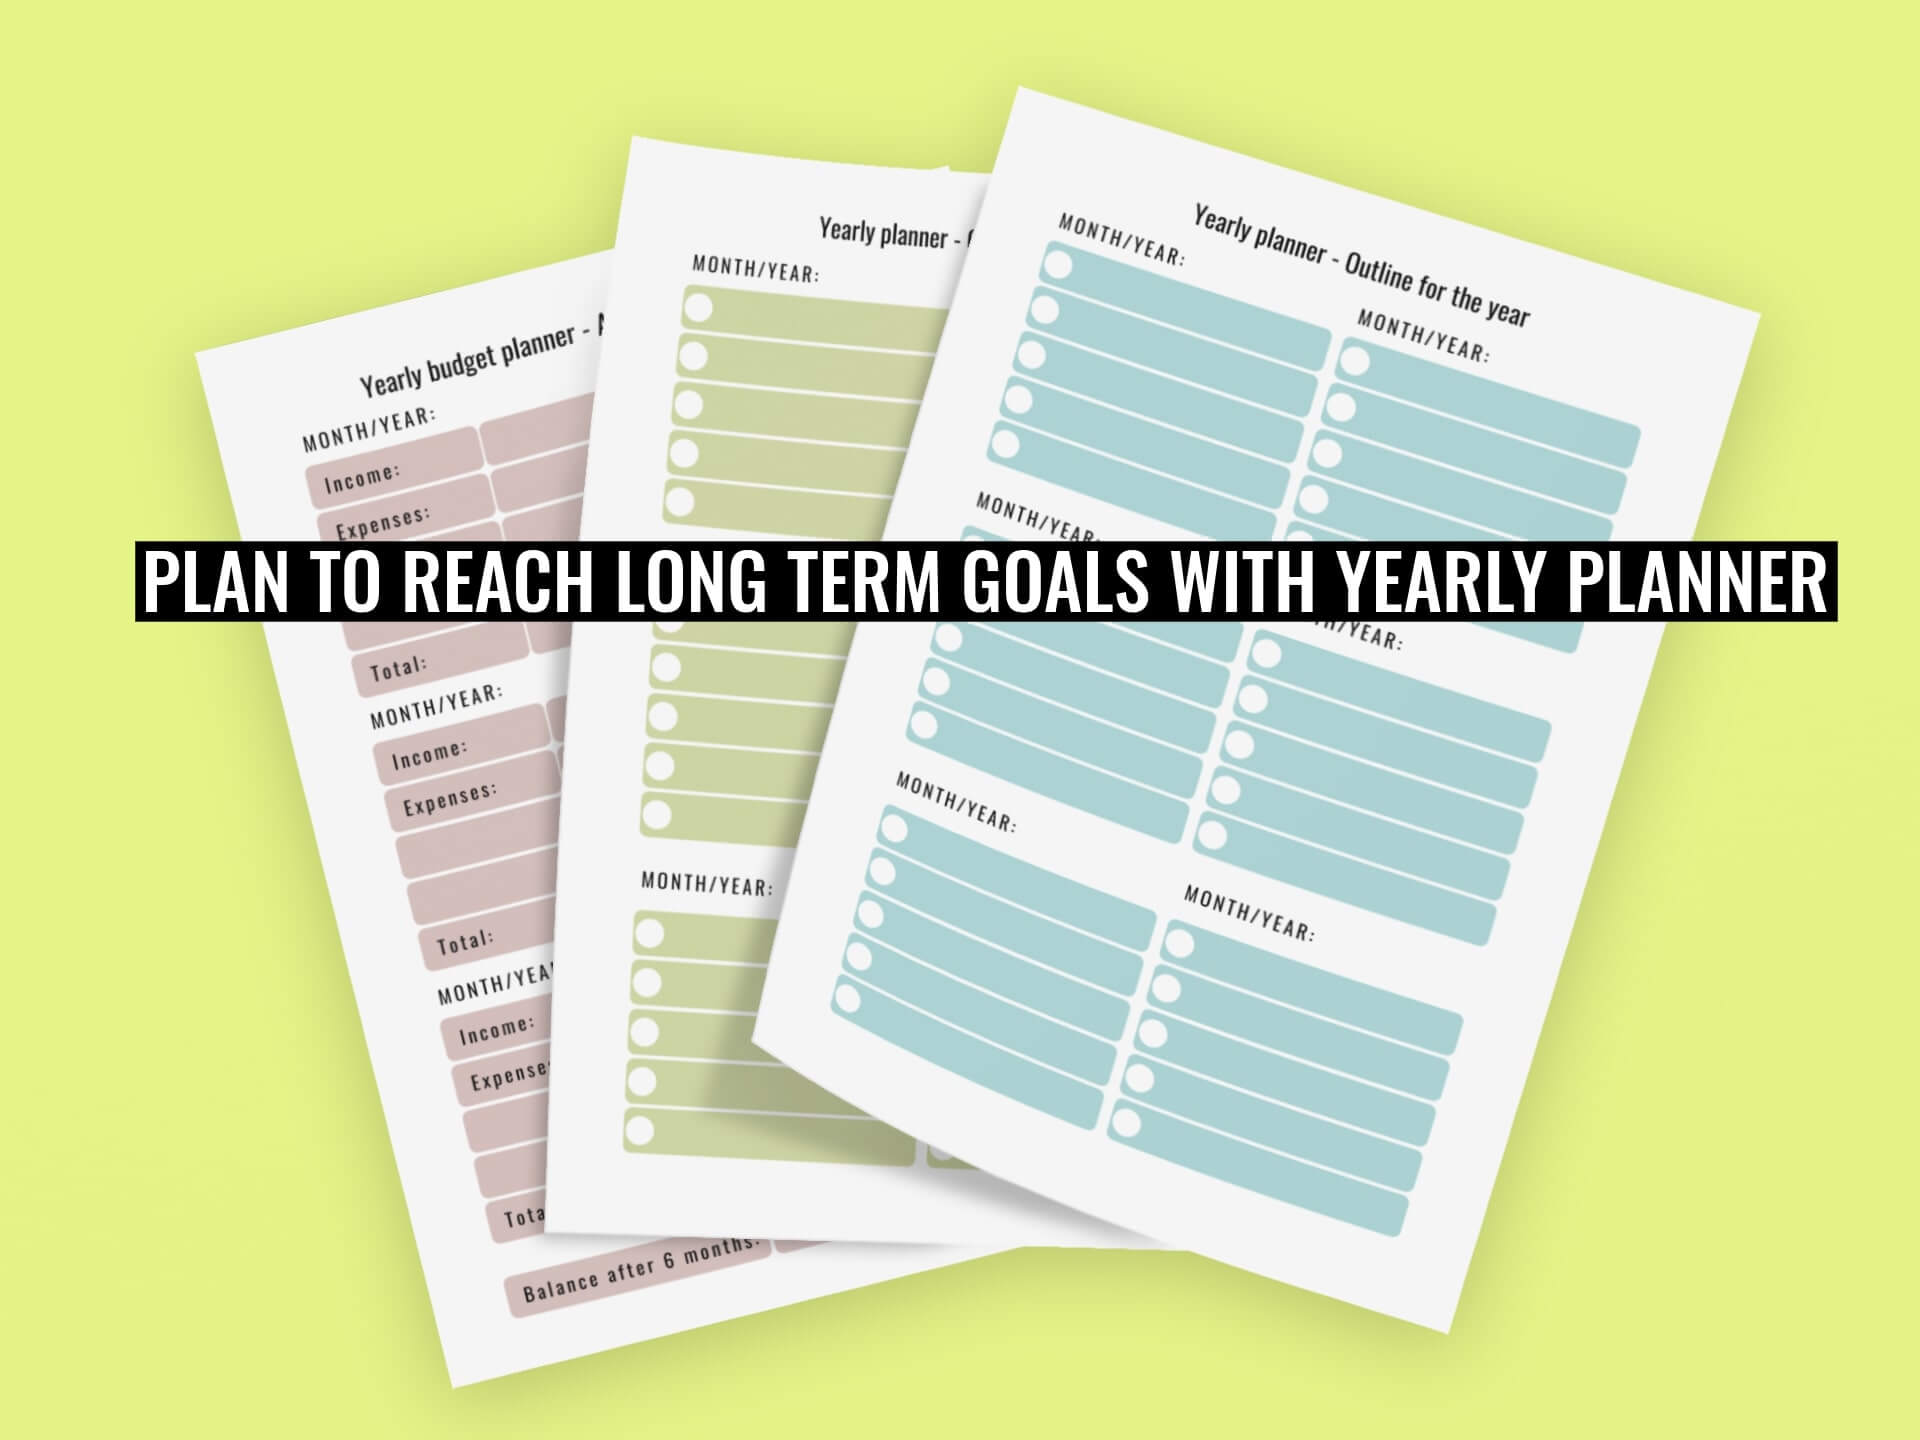 Plan to reach long term goals with yearly planner